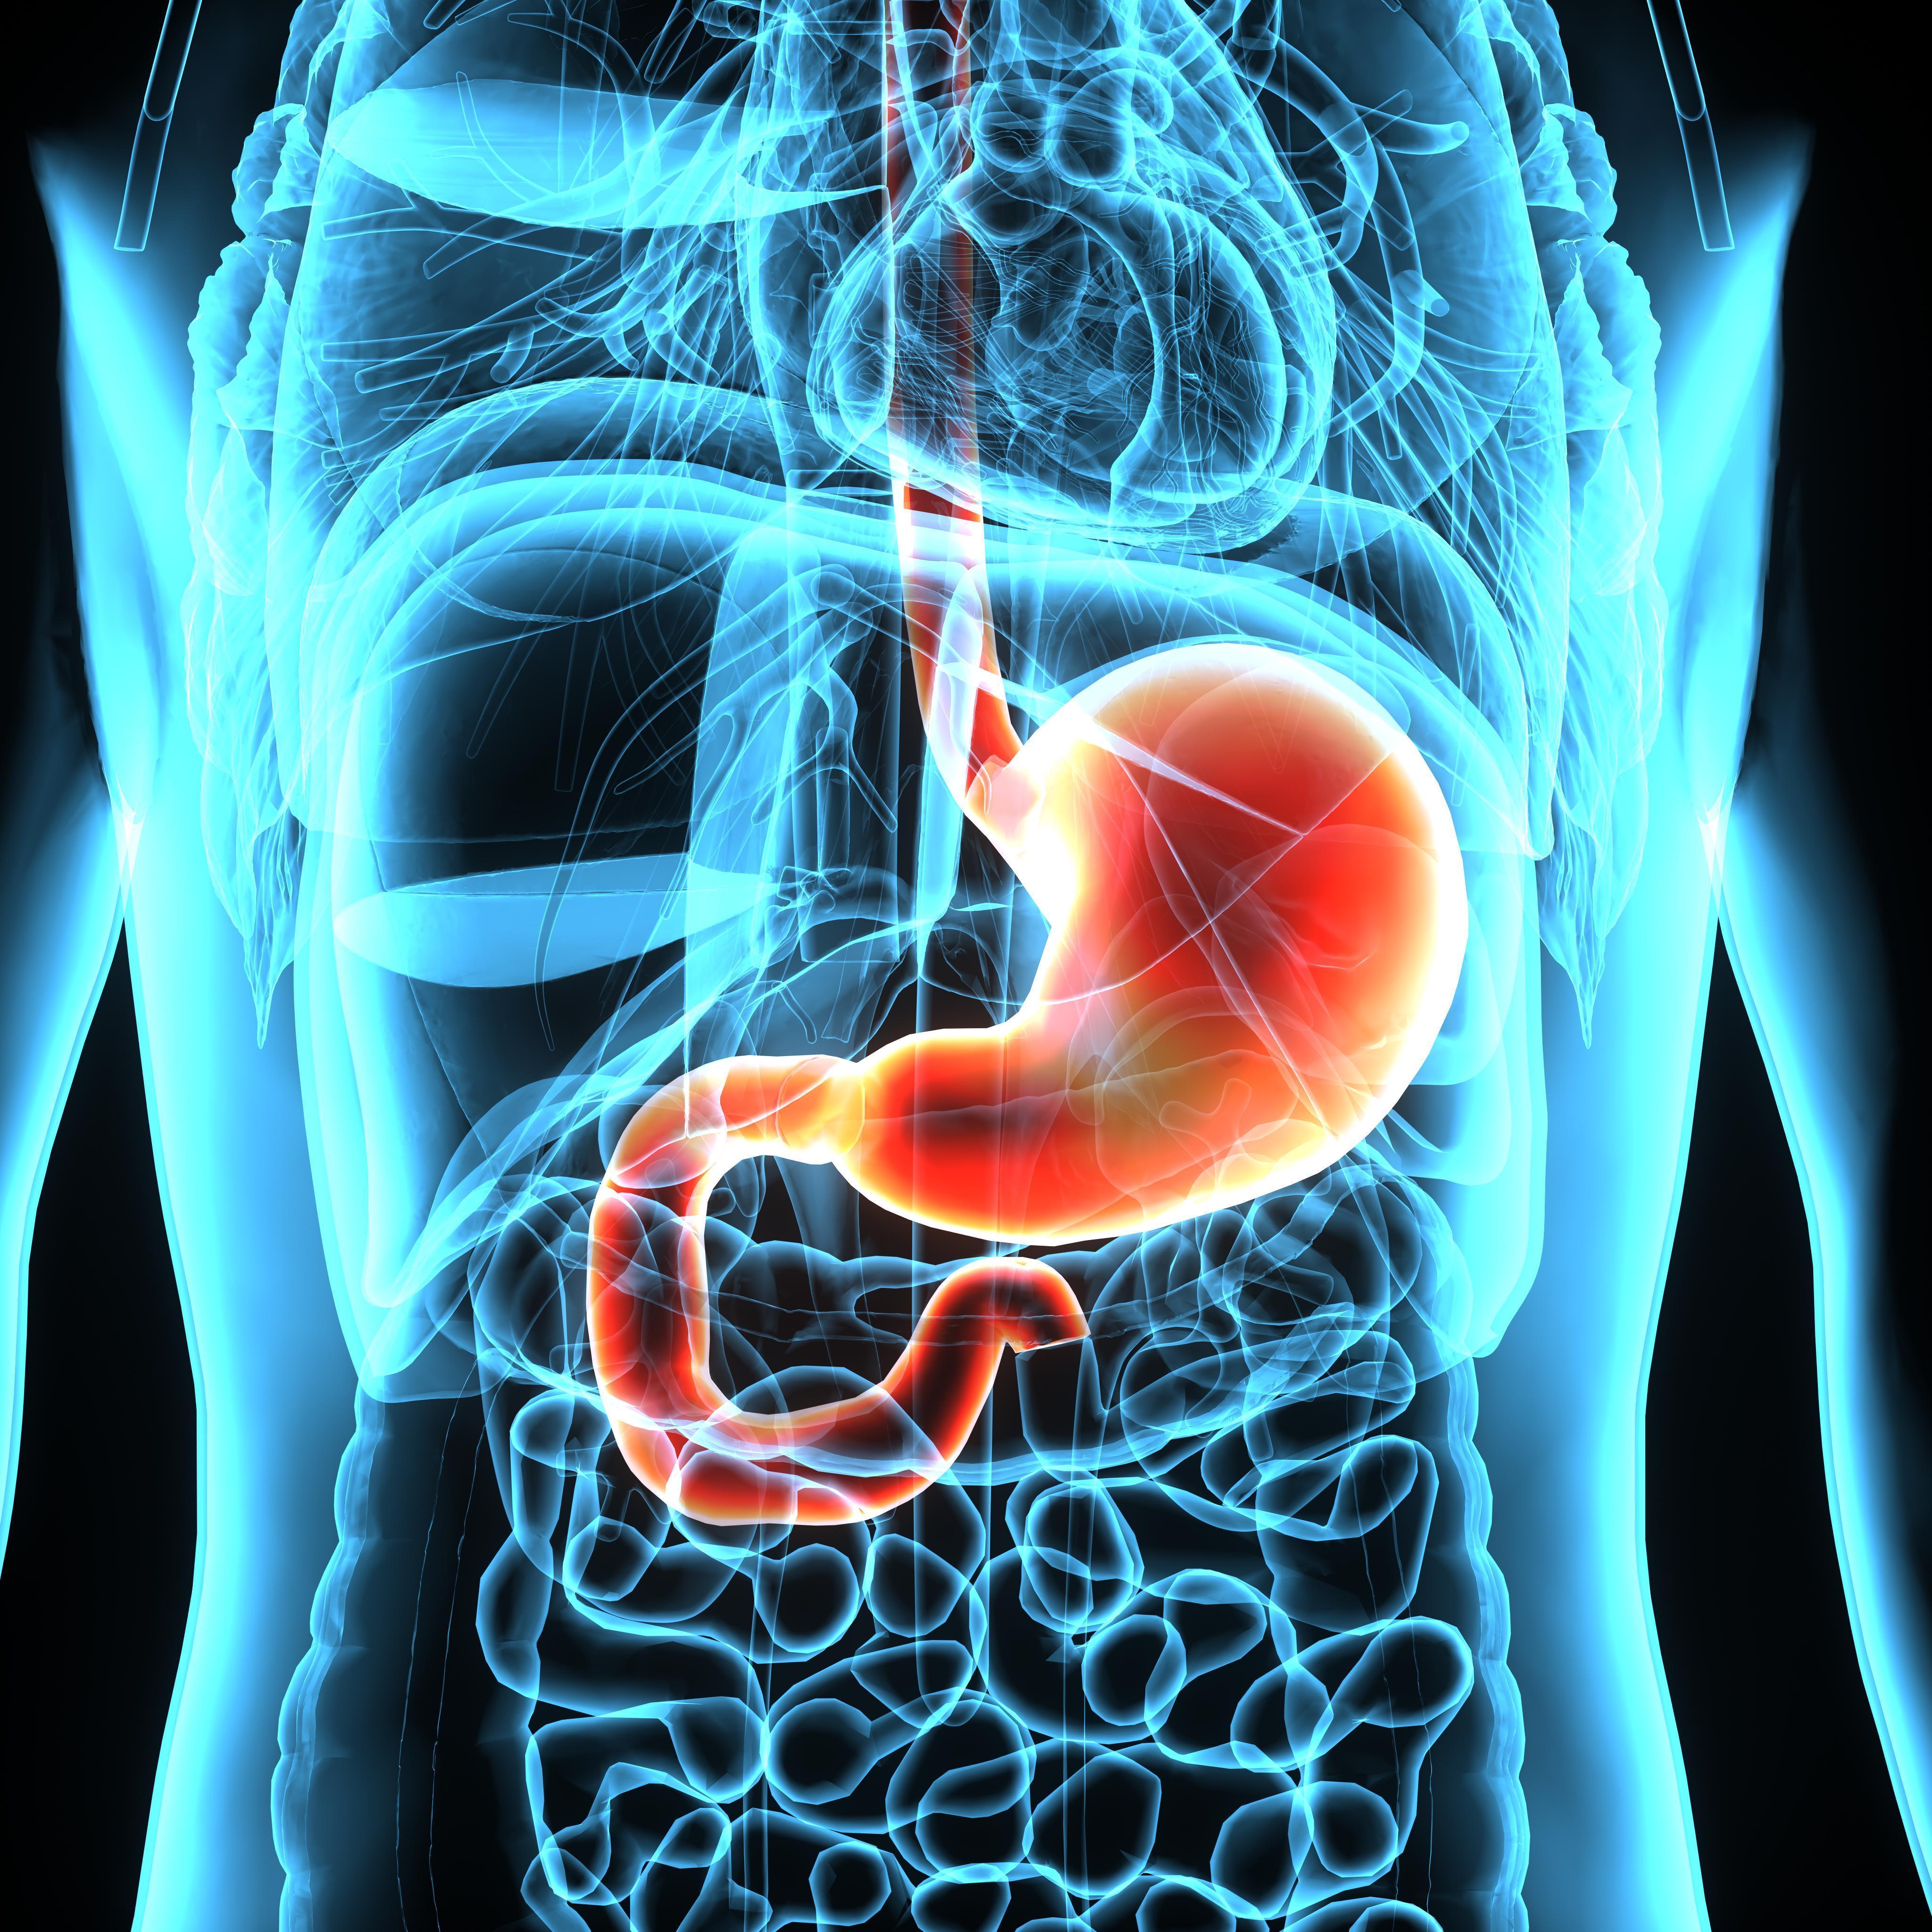 What Is Stomach Cancer? - NCI